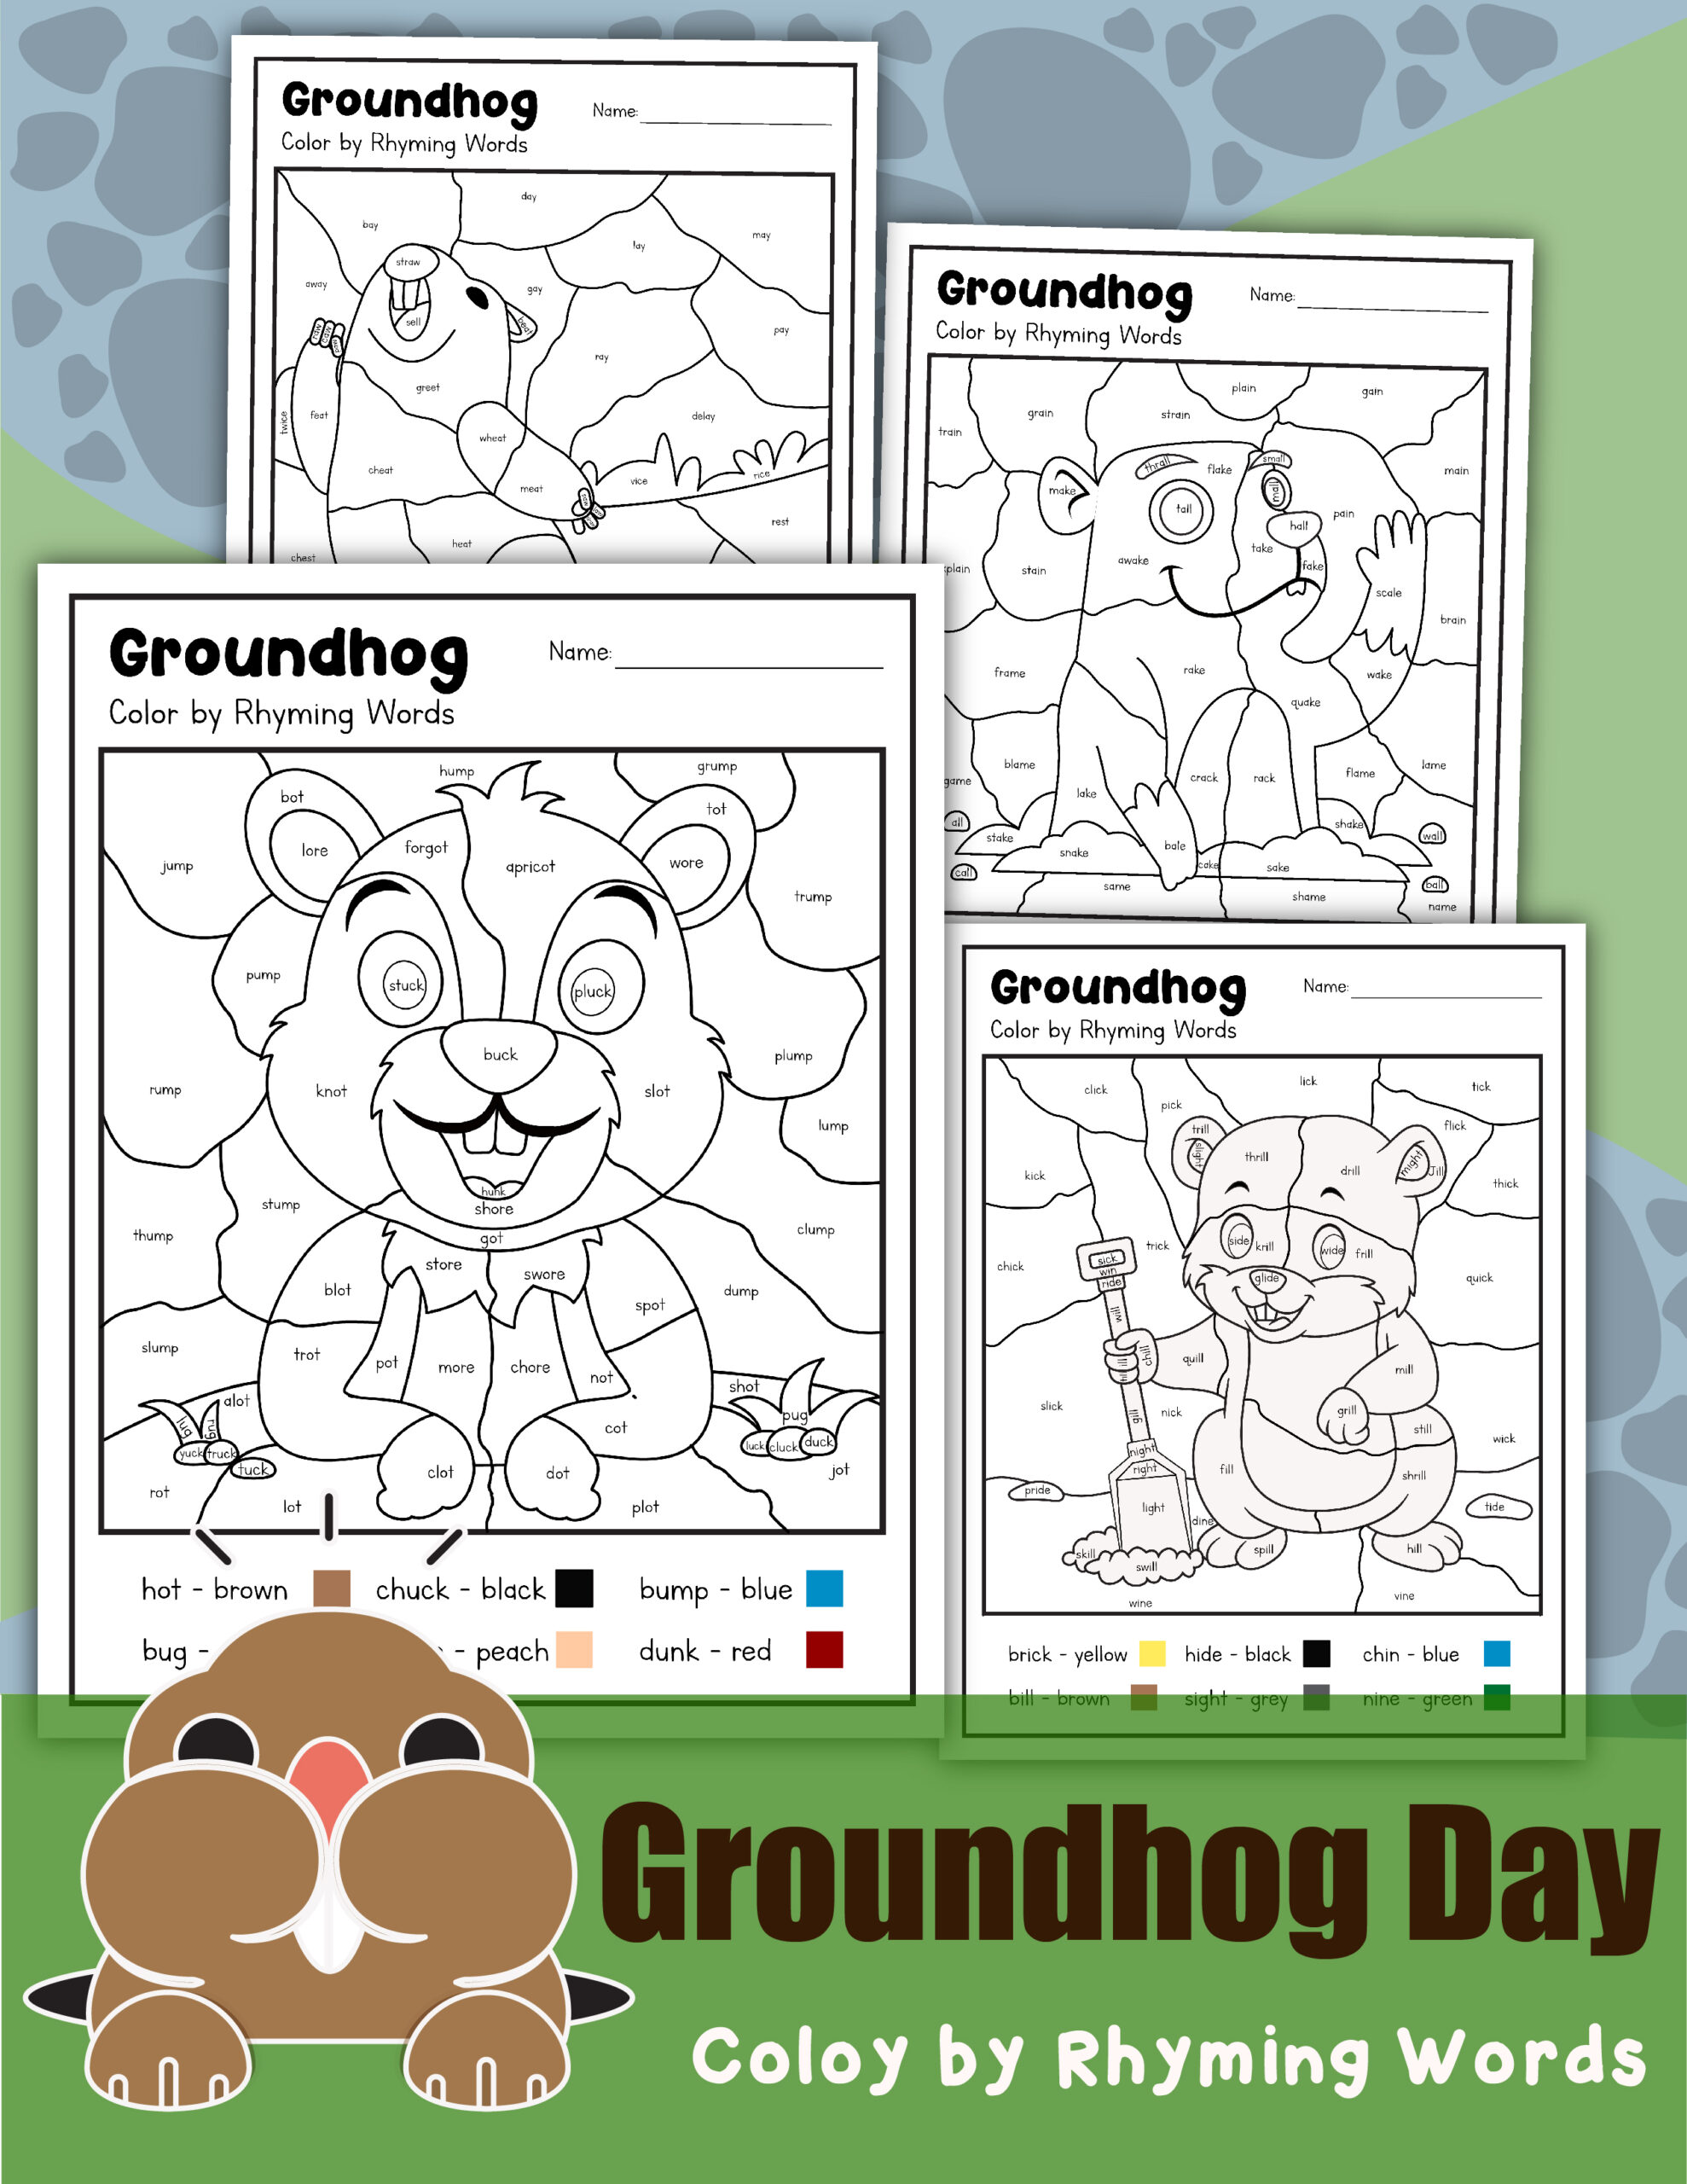 A collage of Groundhog Day coloring sheets using rhyming words.